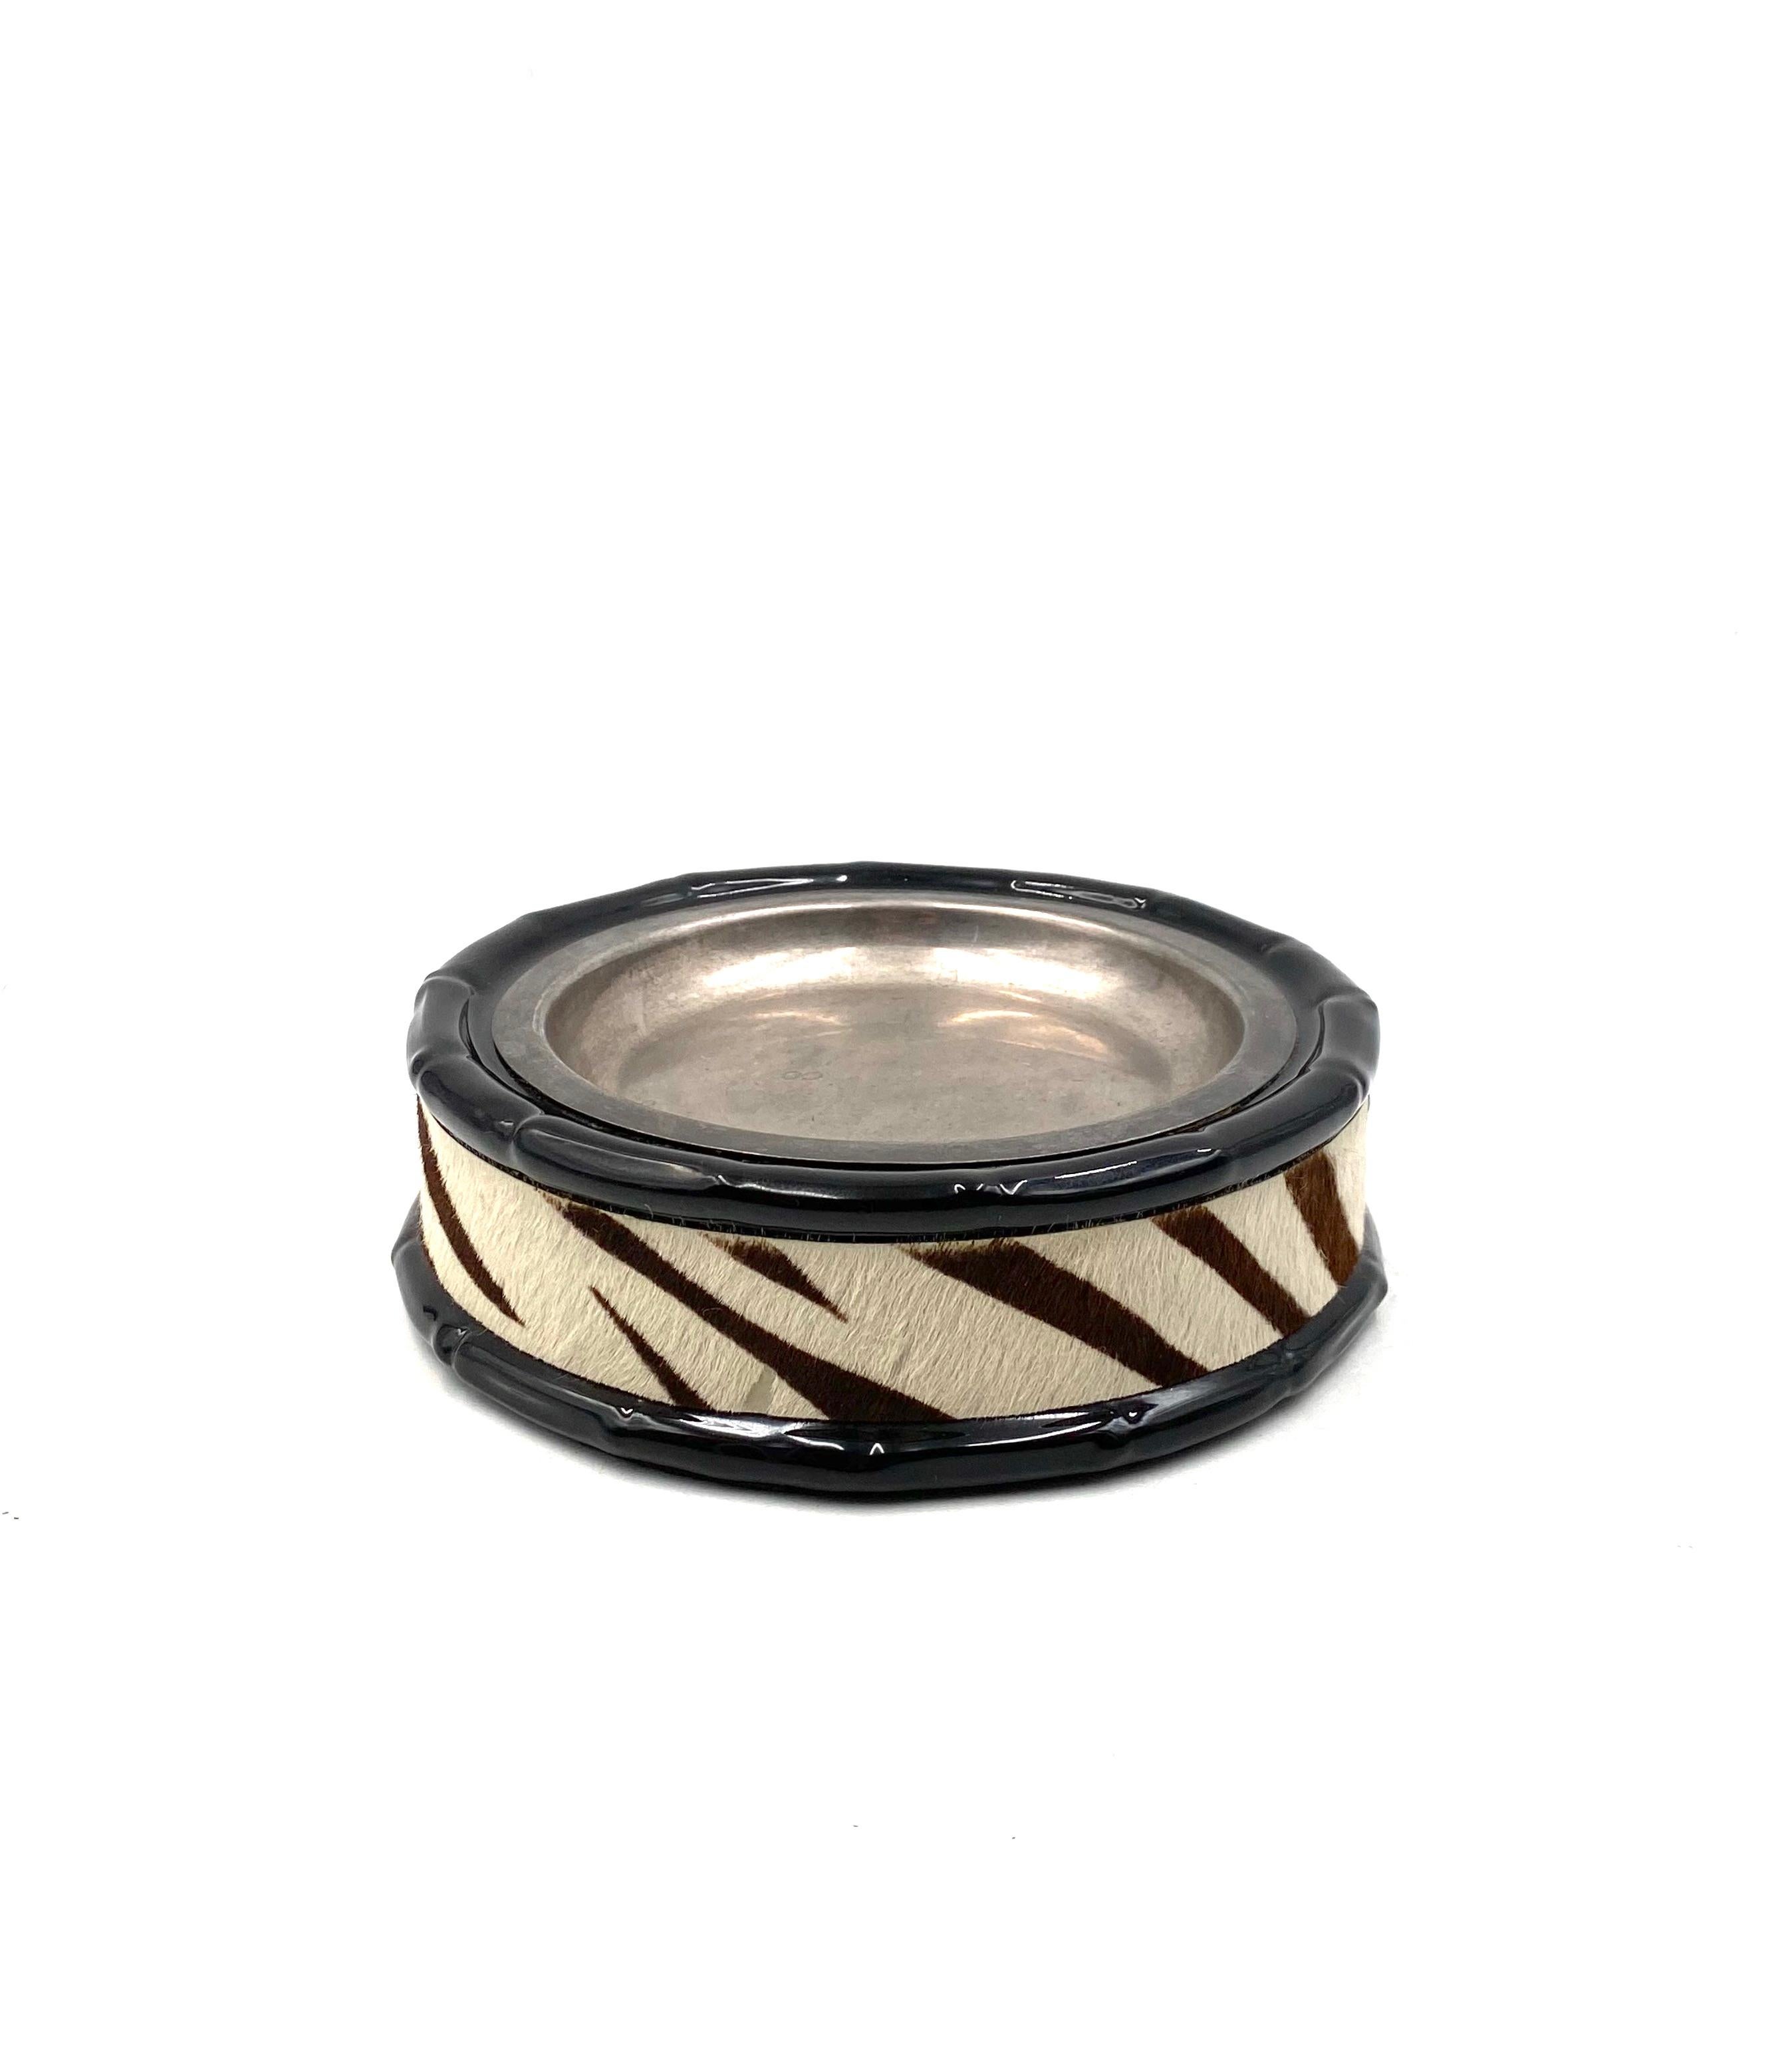 Hollywood regency black ceramic ashtray / vide poche designed by Maria Pia Viaro

Viba Ceramics, ca. 1970

Ceramic, chromed brass, leather

H 6.5 cm - Diam. 20 cm 

Label on the bottom

Conditions: excellent consistent with age and use.